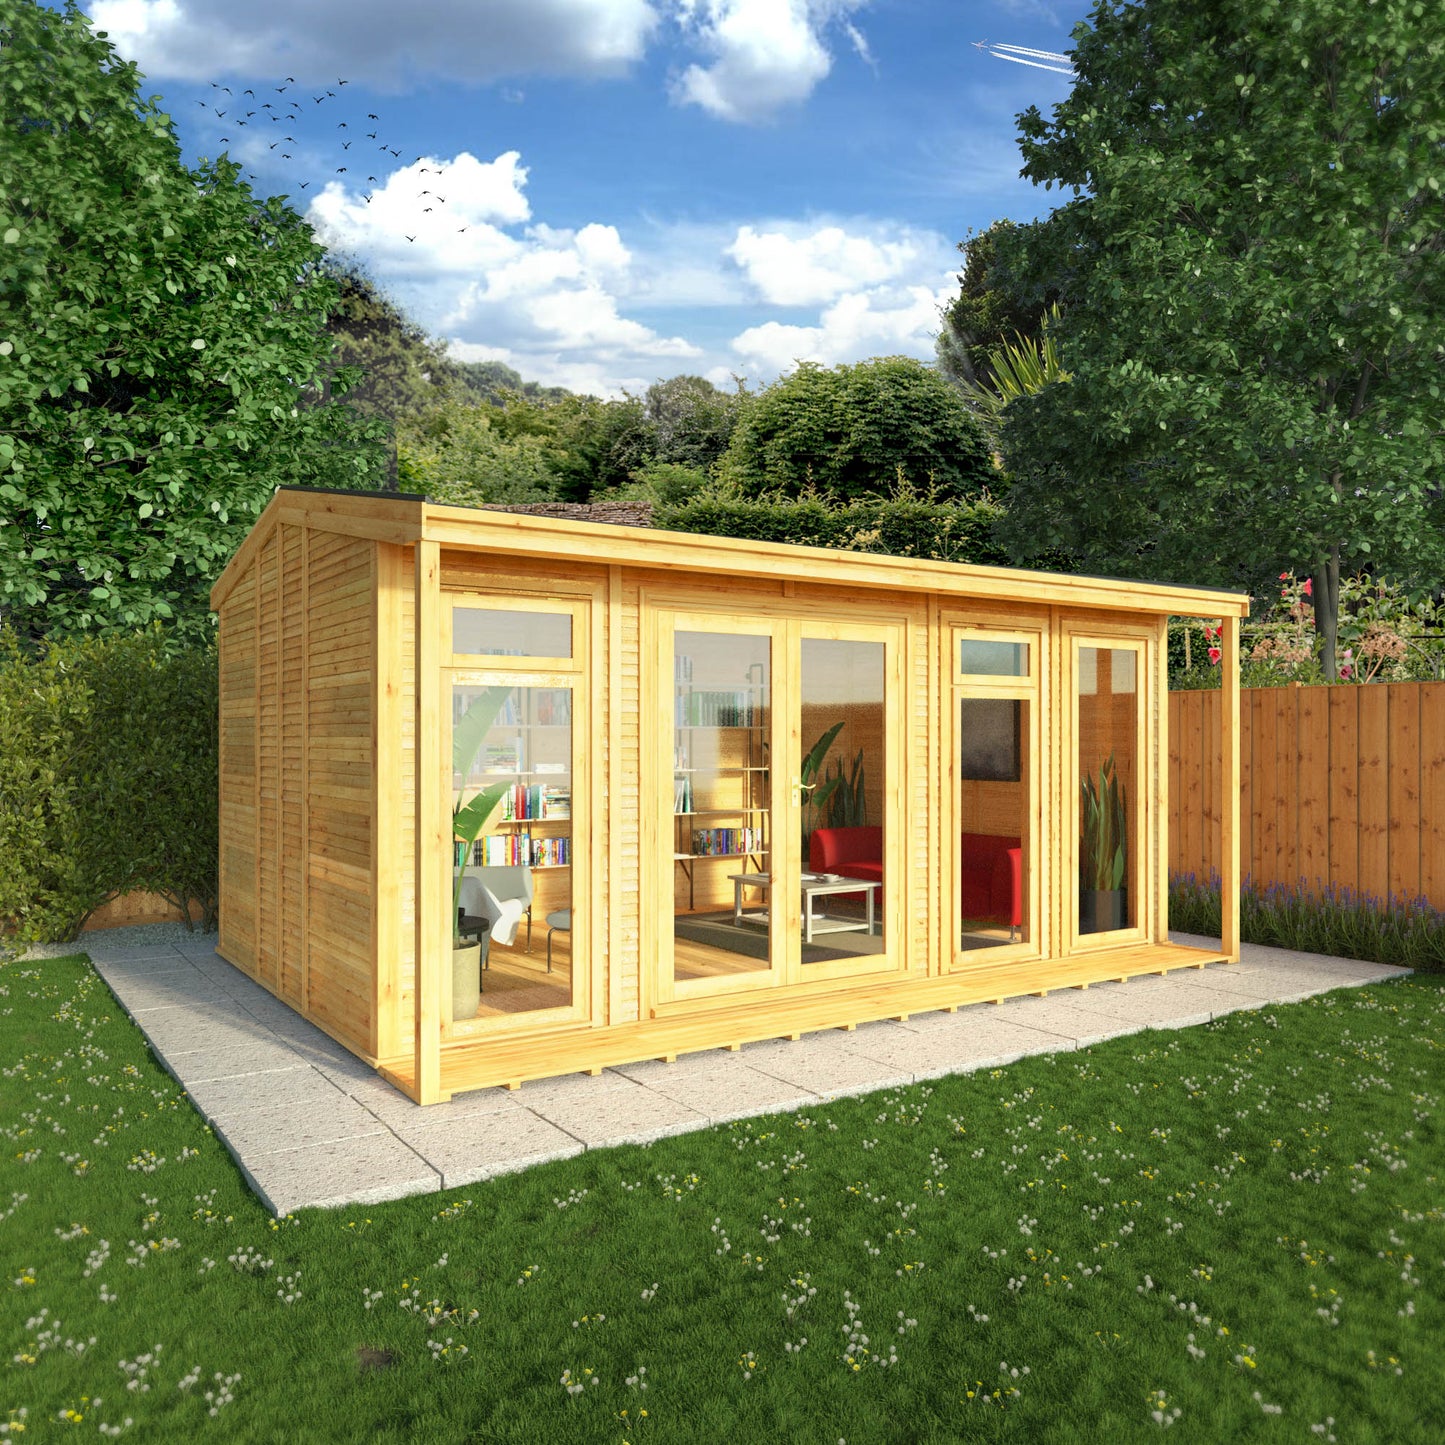 The Thoresby 5m x 3m Premium Insulated Garden Room